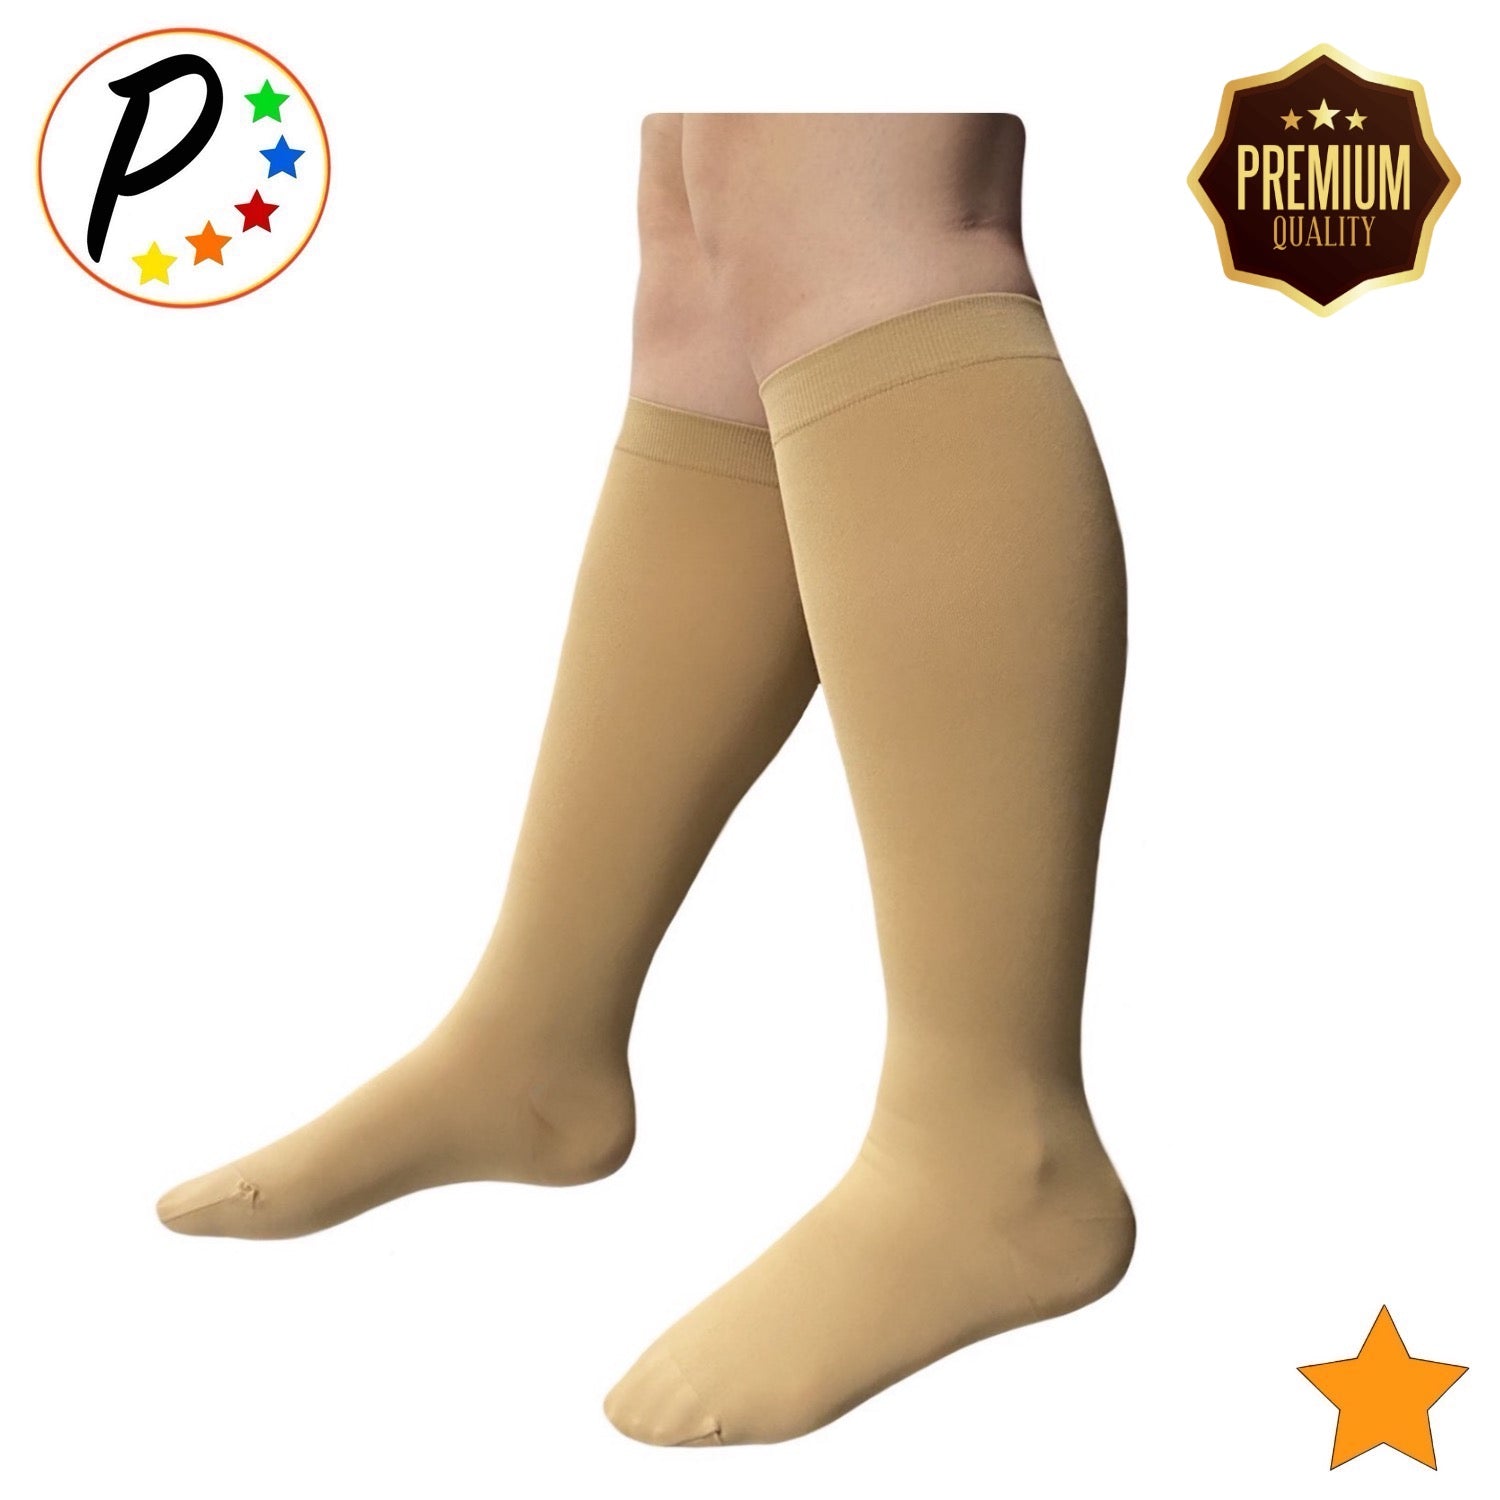 Support Plus Women's Sheer Mild Compression Open Toe Knee High